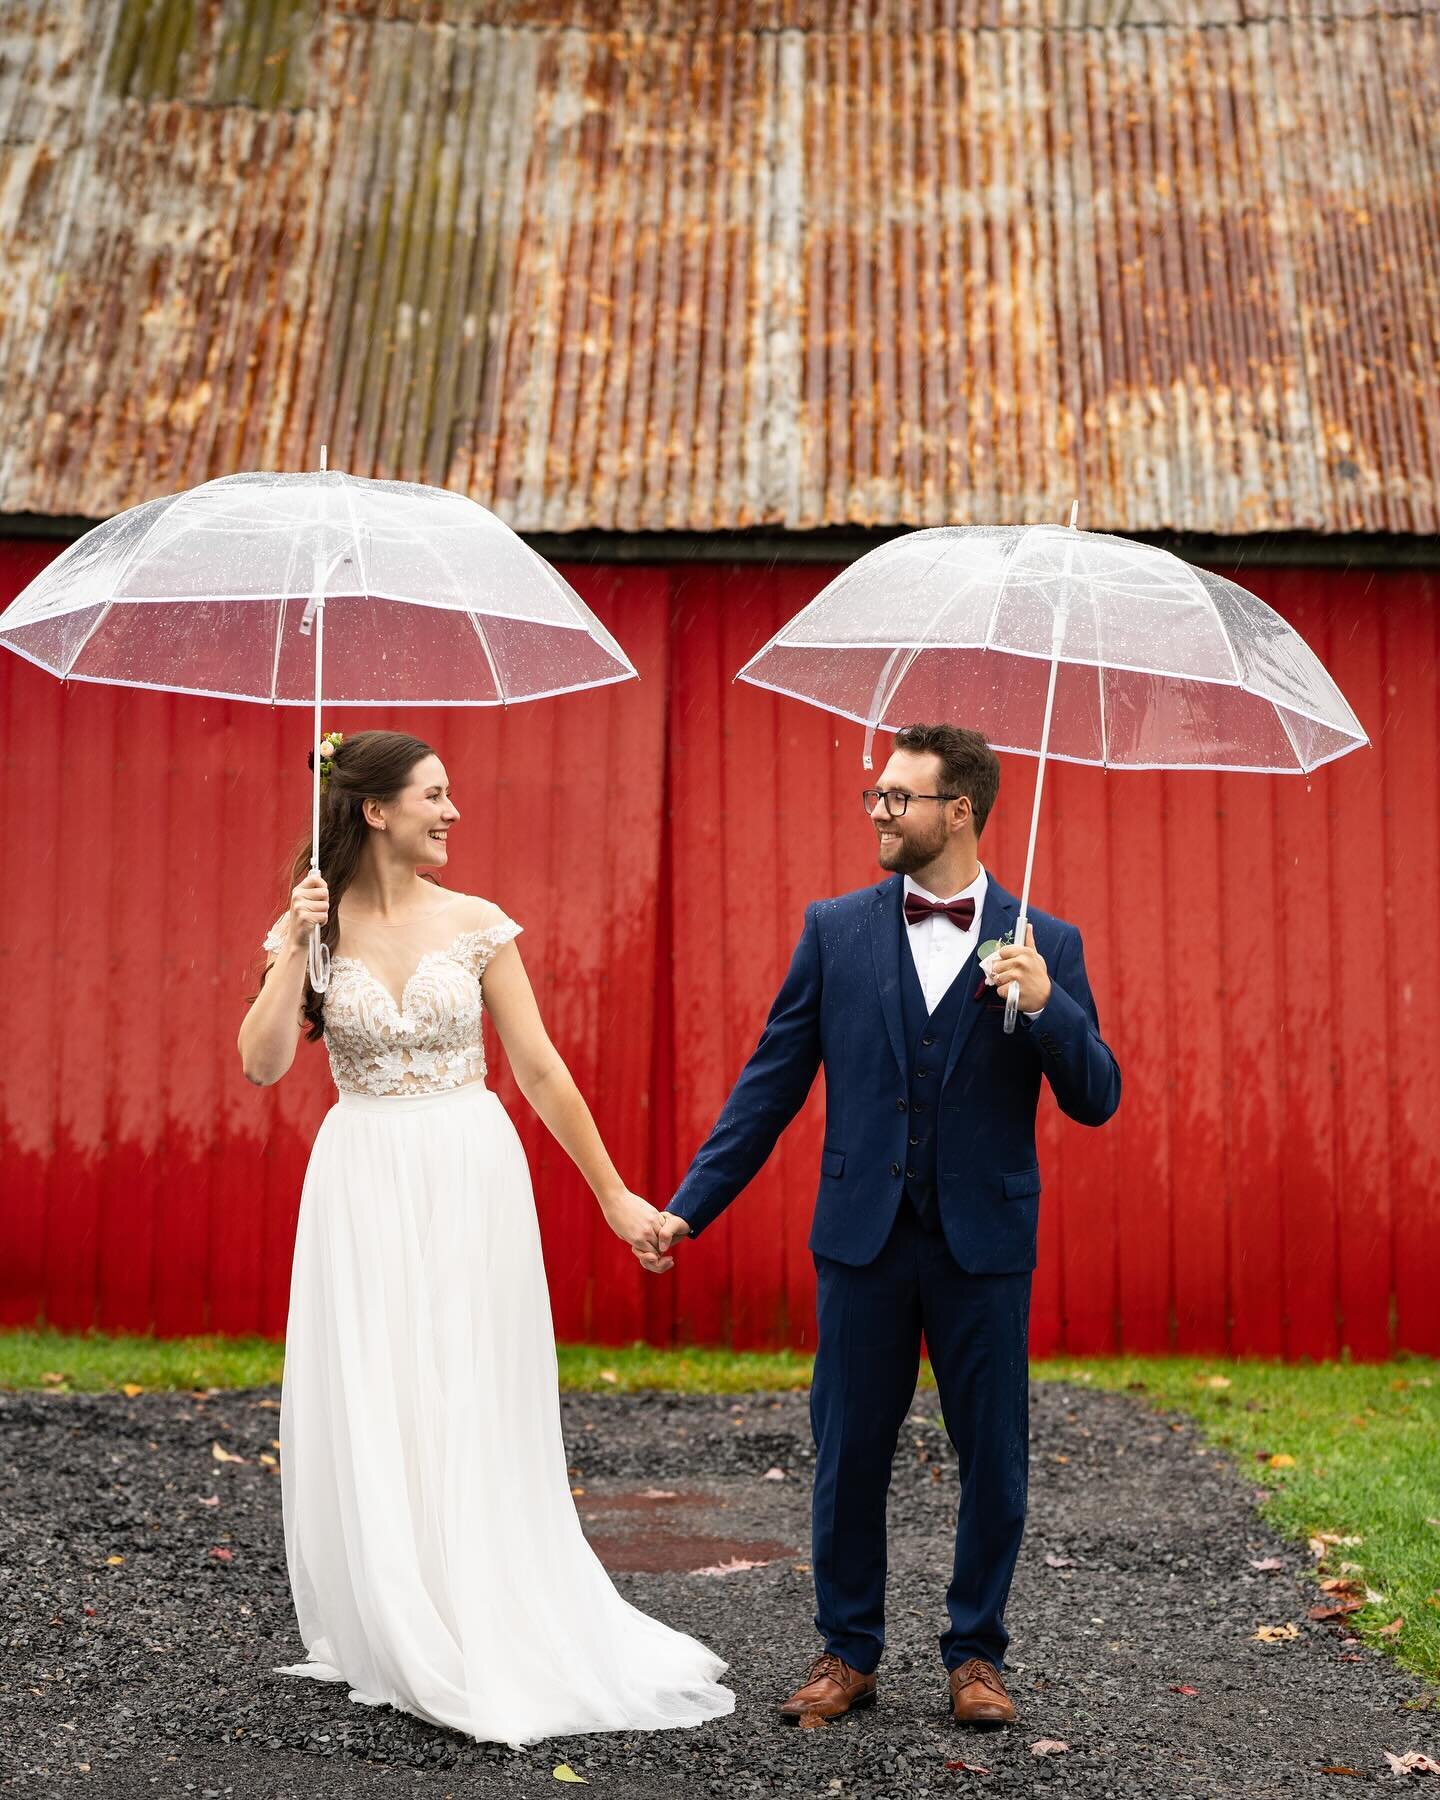 Rain on your wedding day? No sweat! As long as we have some clear umbrella&rsquo;s and sunny thoughts, we can get some amazing shots 😍

A few sneak peeks from Josianne &amp; Matt&rsquo;s wedding day from the beginning of October! Thank you to @stone